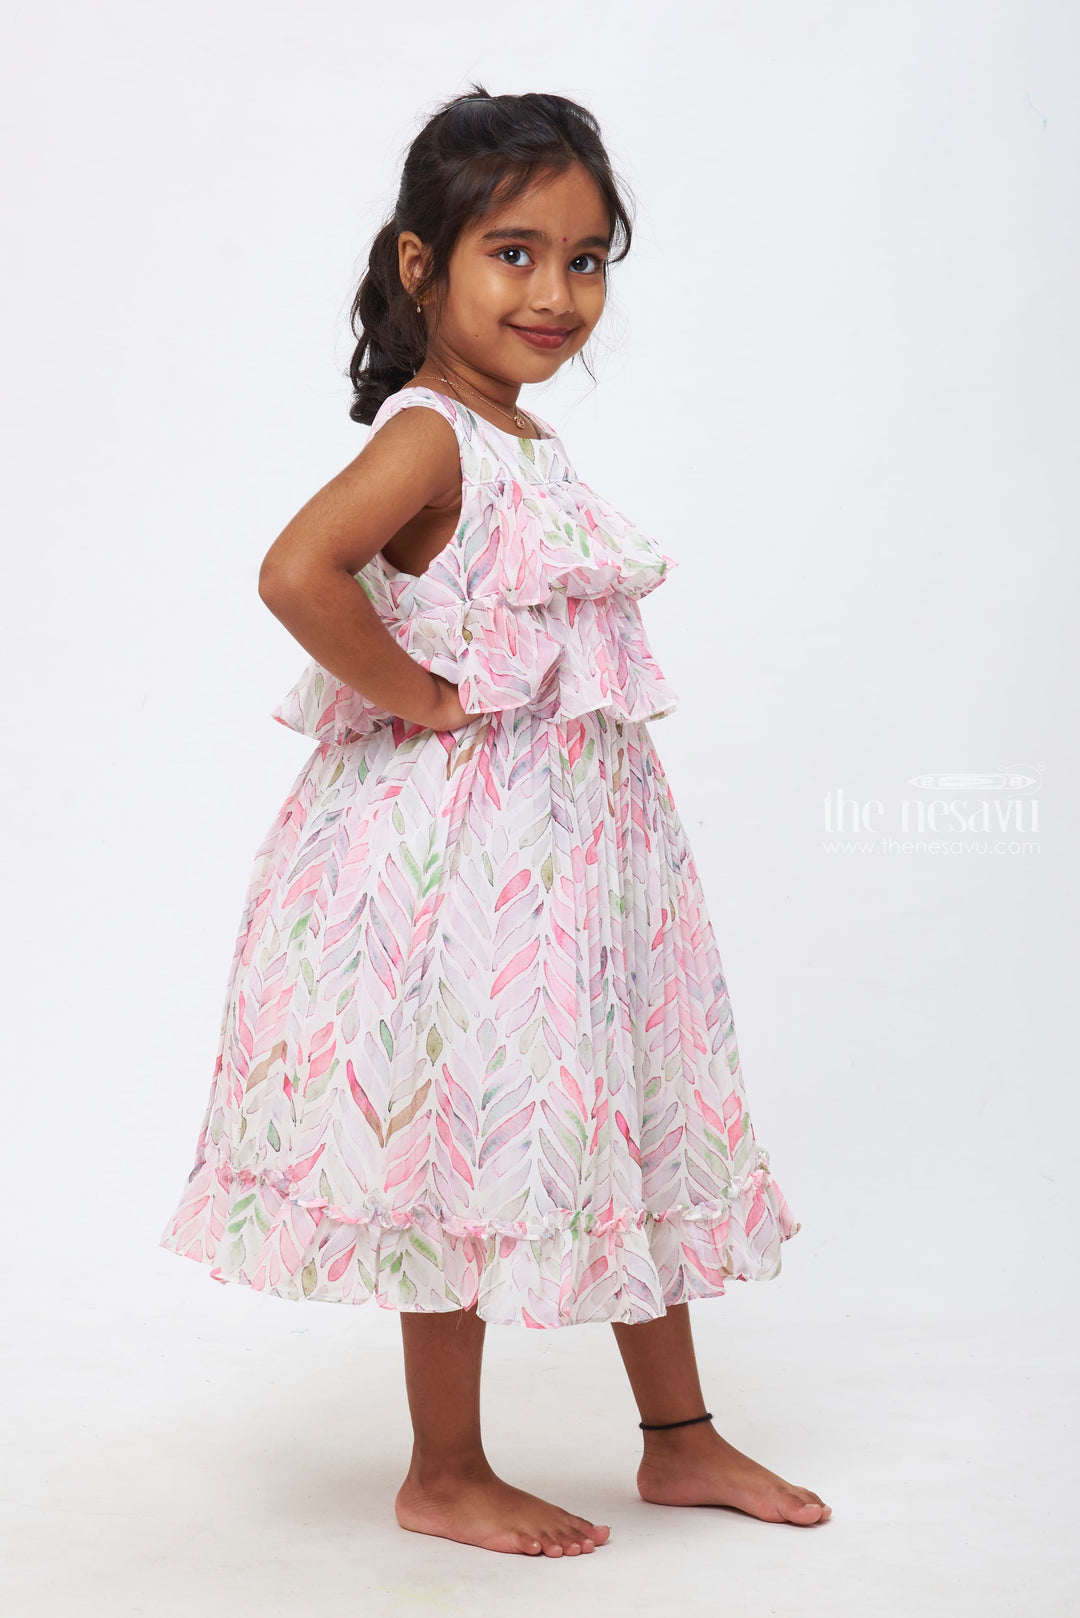 The Nesavu Girls Fancy Frock Pastel Shades with Leafy Patterned Pink Fancy Frocks for Girls Nesavu 16 (1Y) / Pink / Poly Georgette GFC1168B-16 Girls Daily Wear Frocks | Contemporary Cotton Frock Styles for Girls | The Nesavu